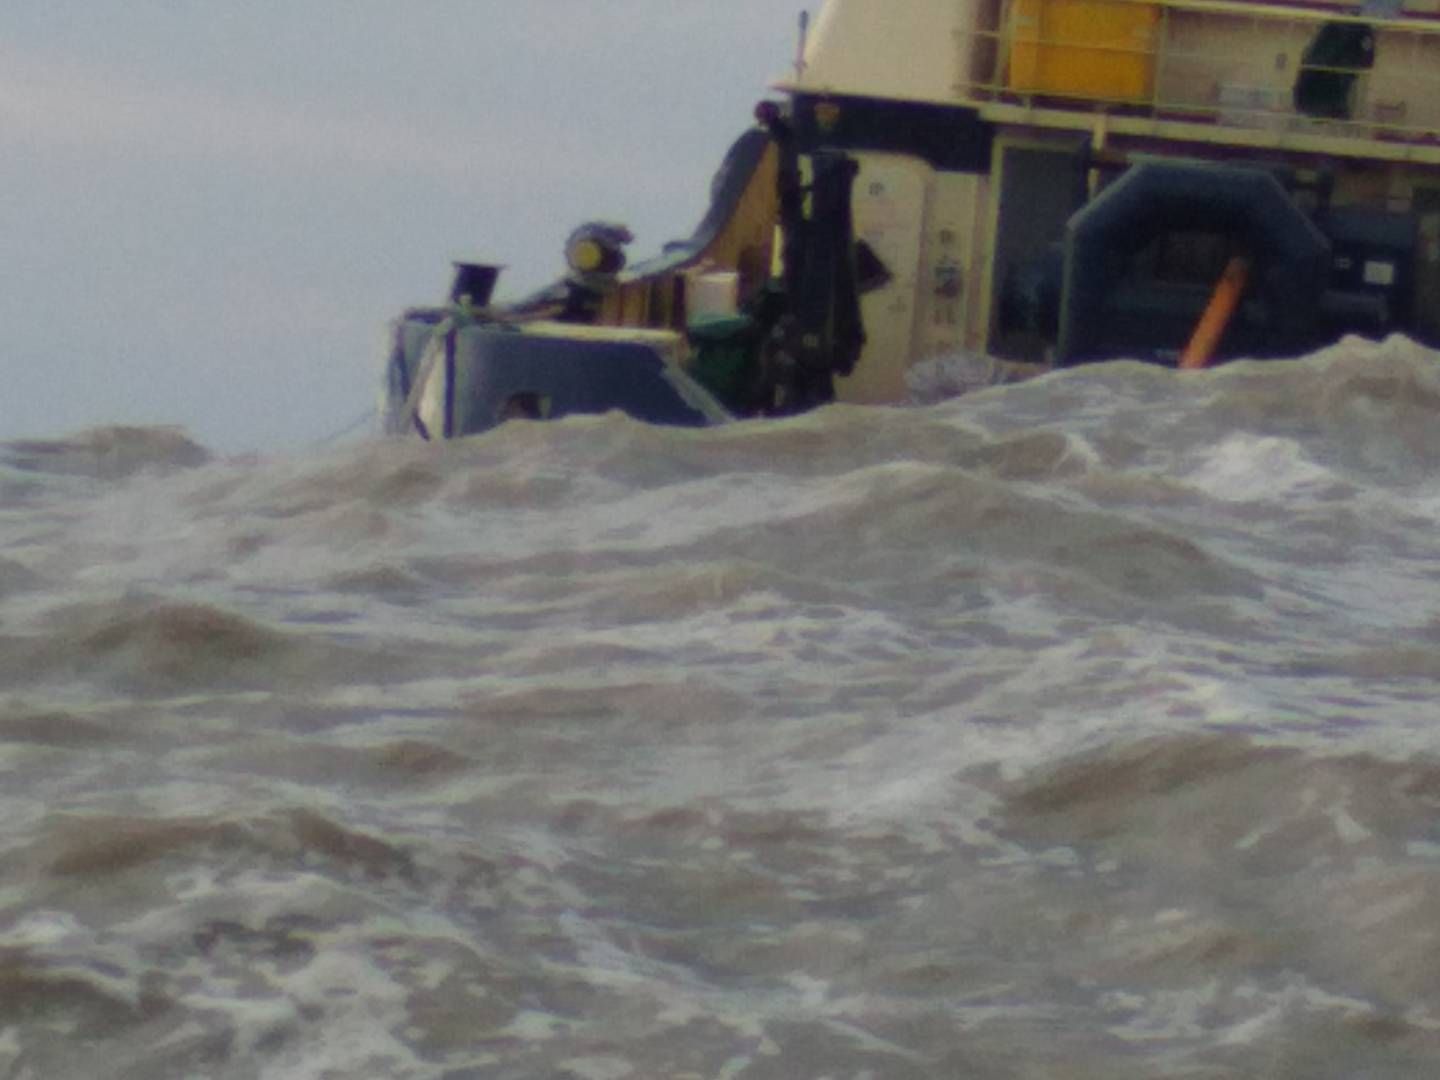 Working on a tug boat at sea during rough sea. Photo taken from a small boat during salvage work at sea..